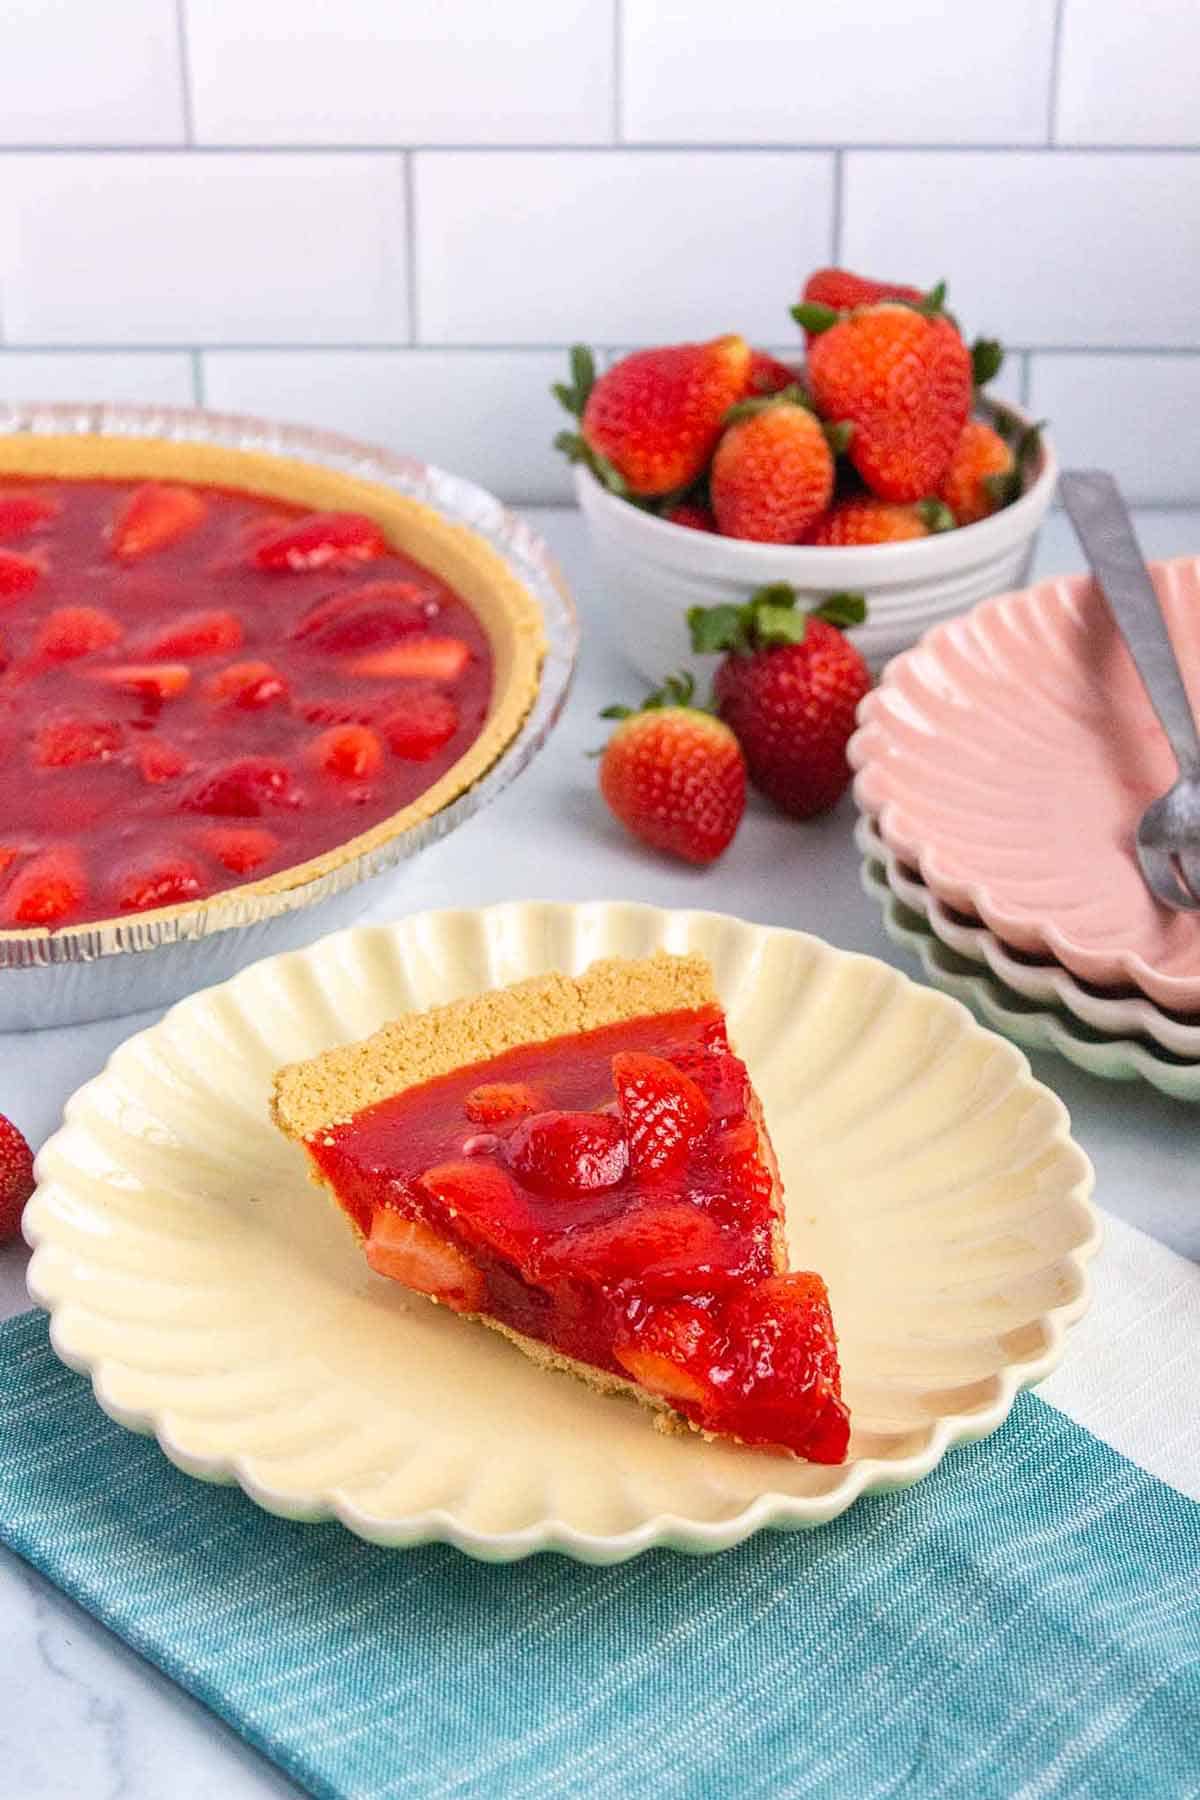 Slice of strawberry jello pie on a small plated.